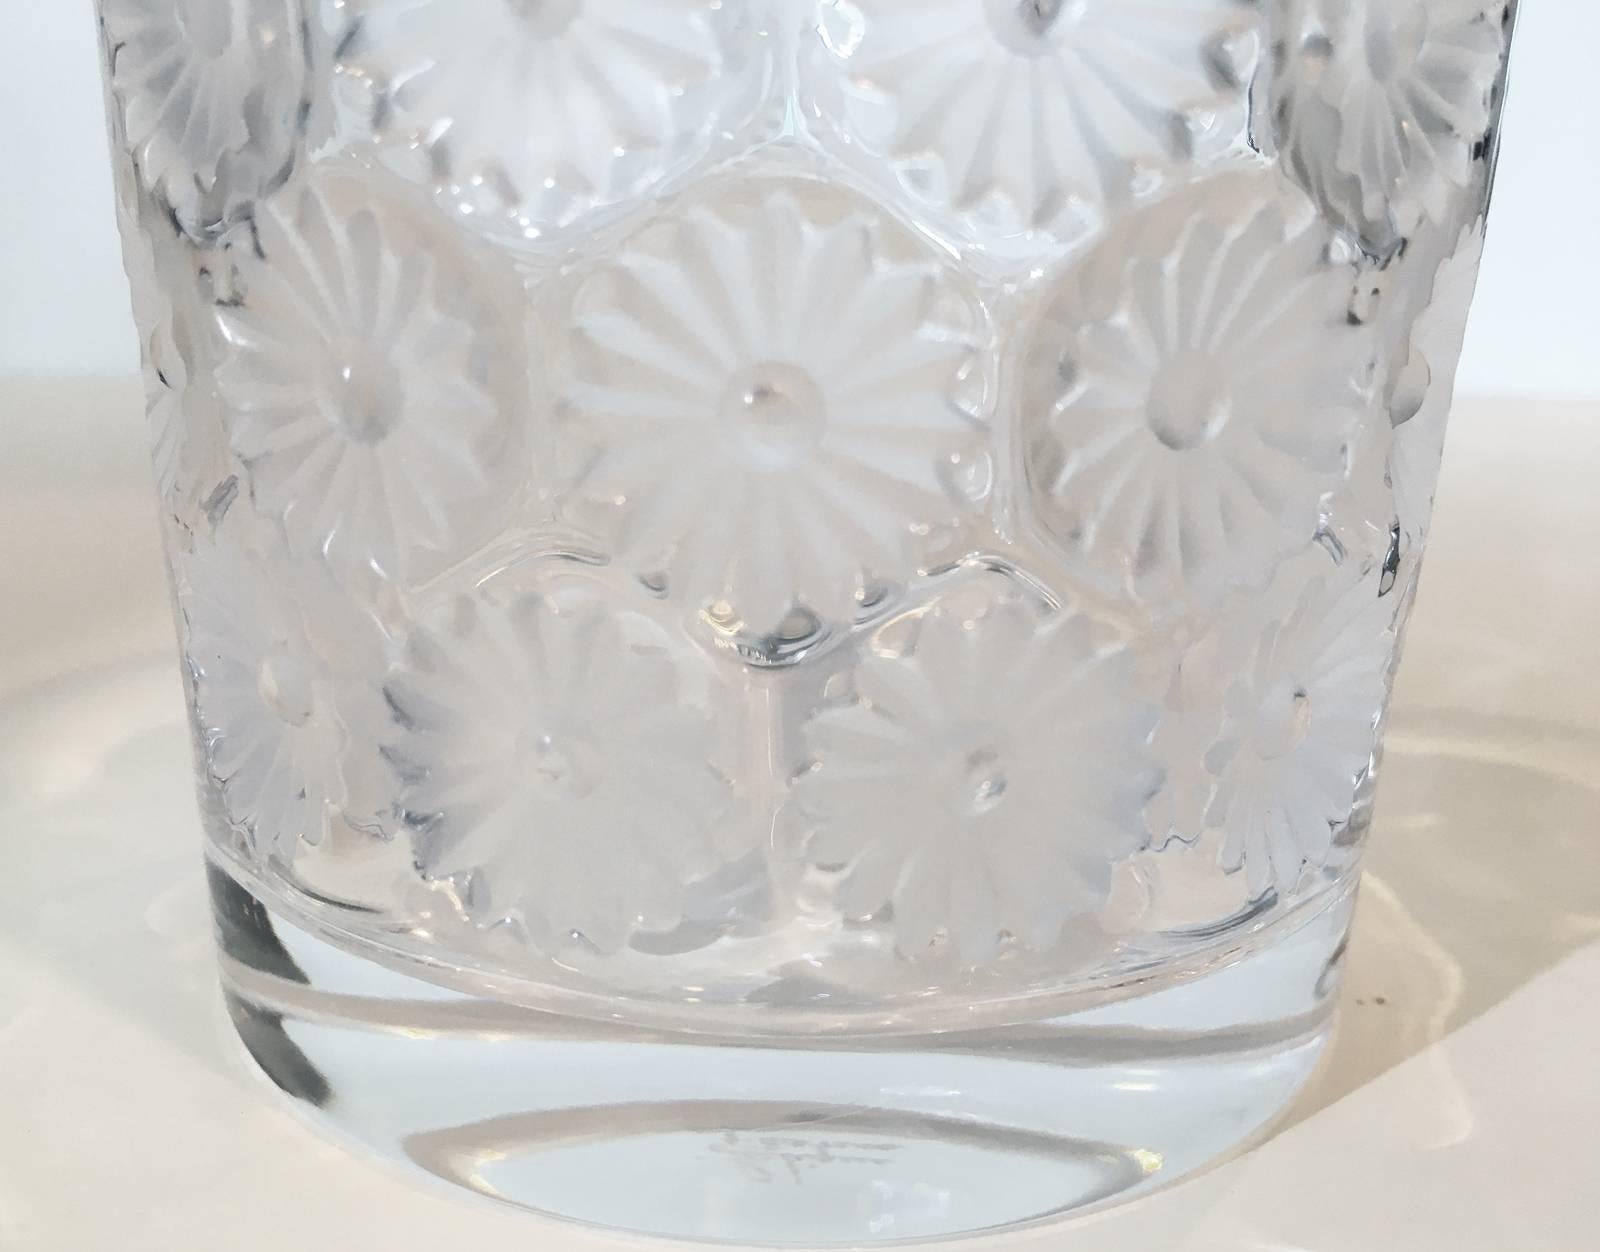 A rare and excellent pair of vintage Lalique double old fashioned cocktail glasses in the Napsbury pattern with recessed frosted daisies. Signed at the base; Lalique France.